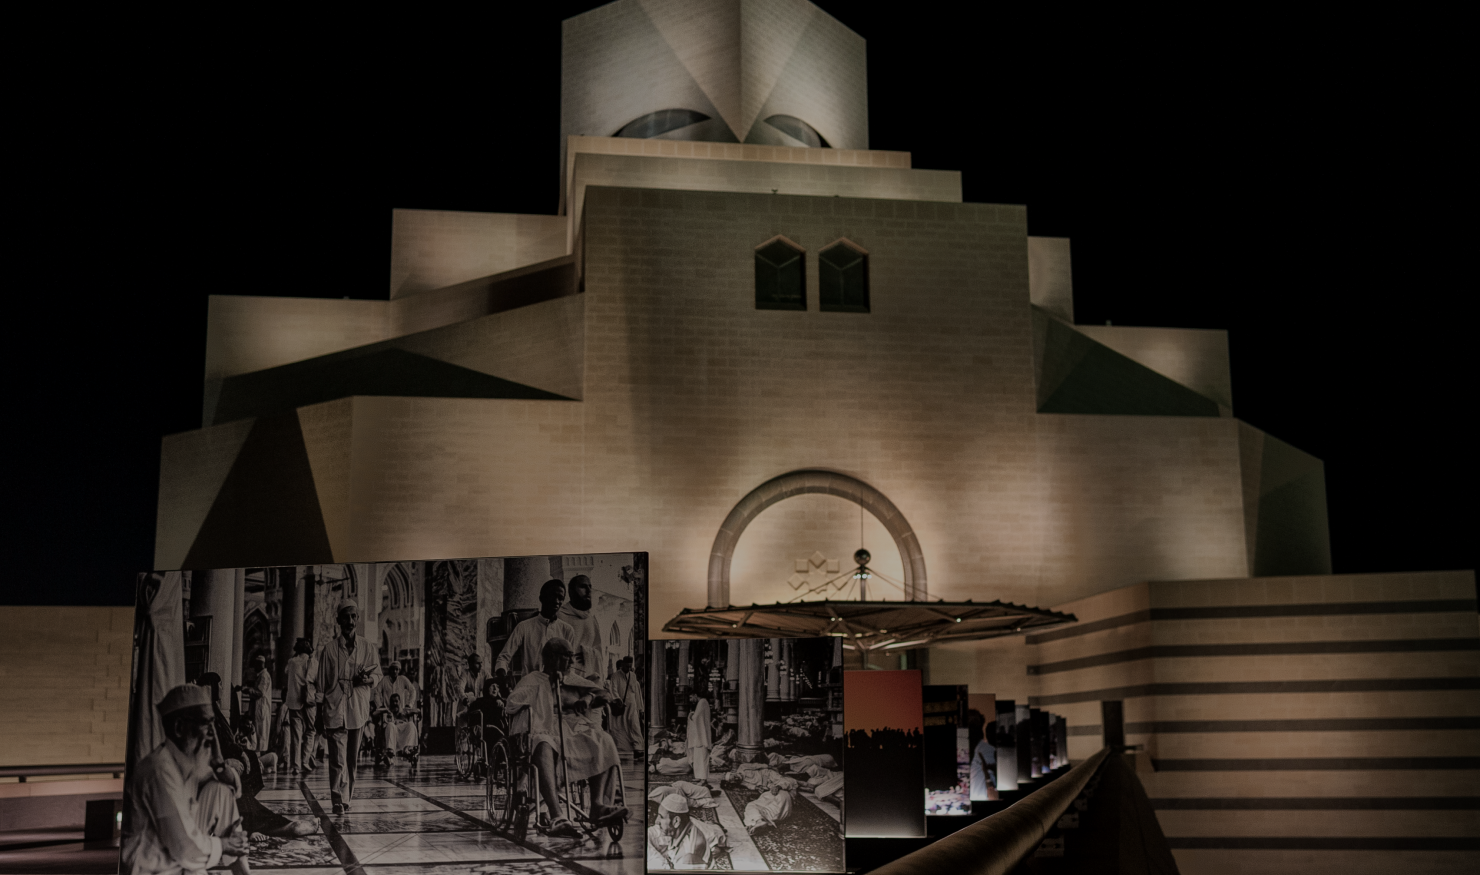 Museum of Islamic Art lit up at night, with large photos printed on panels leading to the entrance.